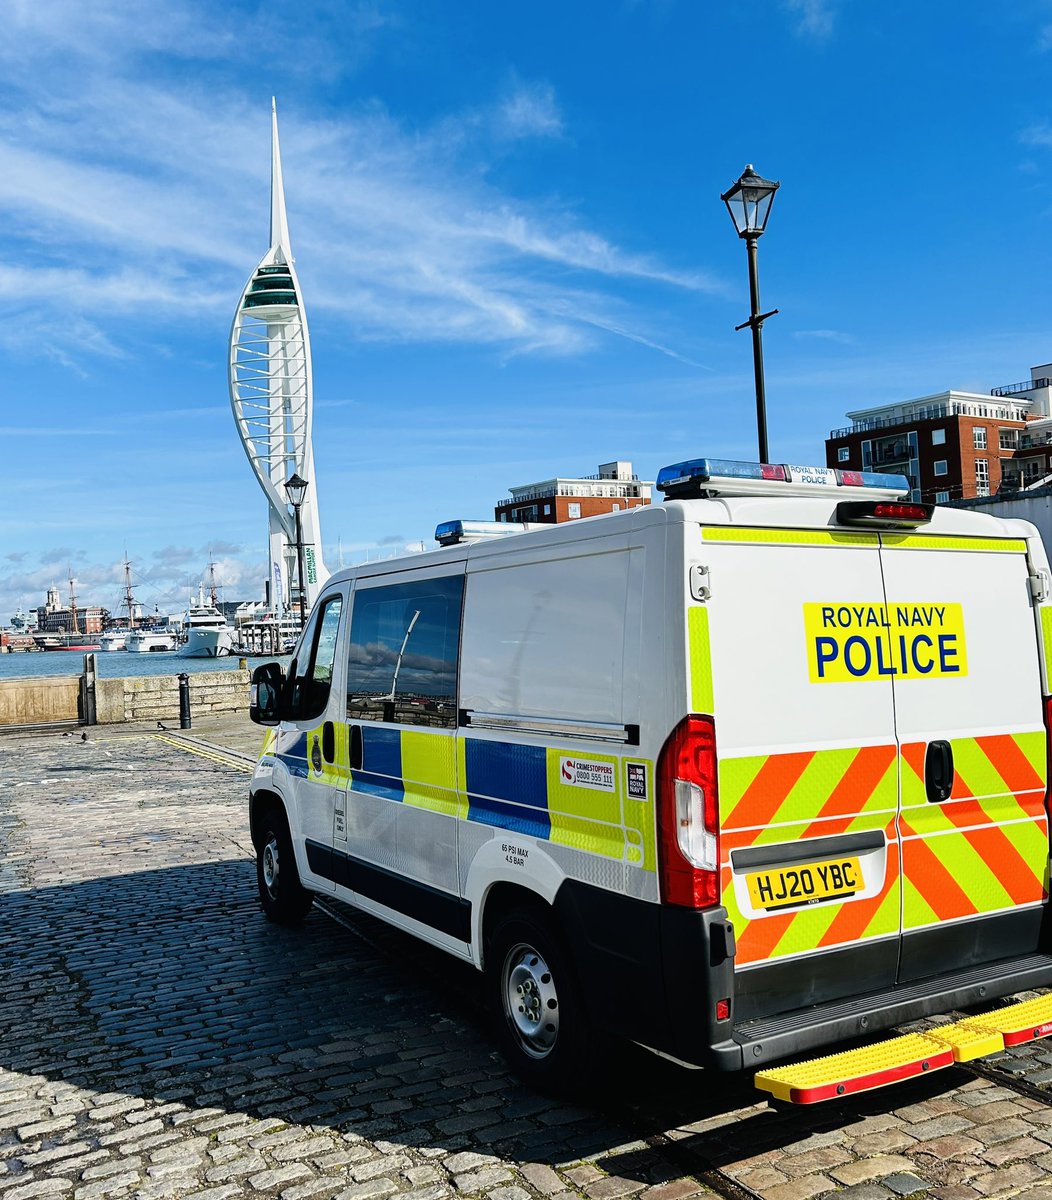 Sunny skies for this mornings patrol of Old Portsmouth and surrounding areas ☀️👮‍♂️ Majority of RN personnel are at home enjoying some well earned Easter leave. However we are here 24/7, 365 days a year and ready to assist you if required 👋 #OnPatrol